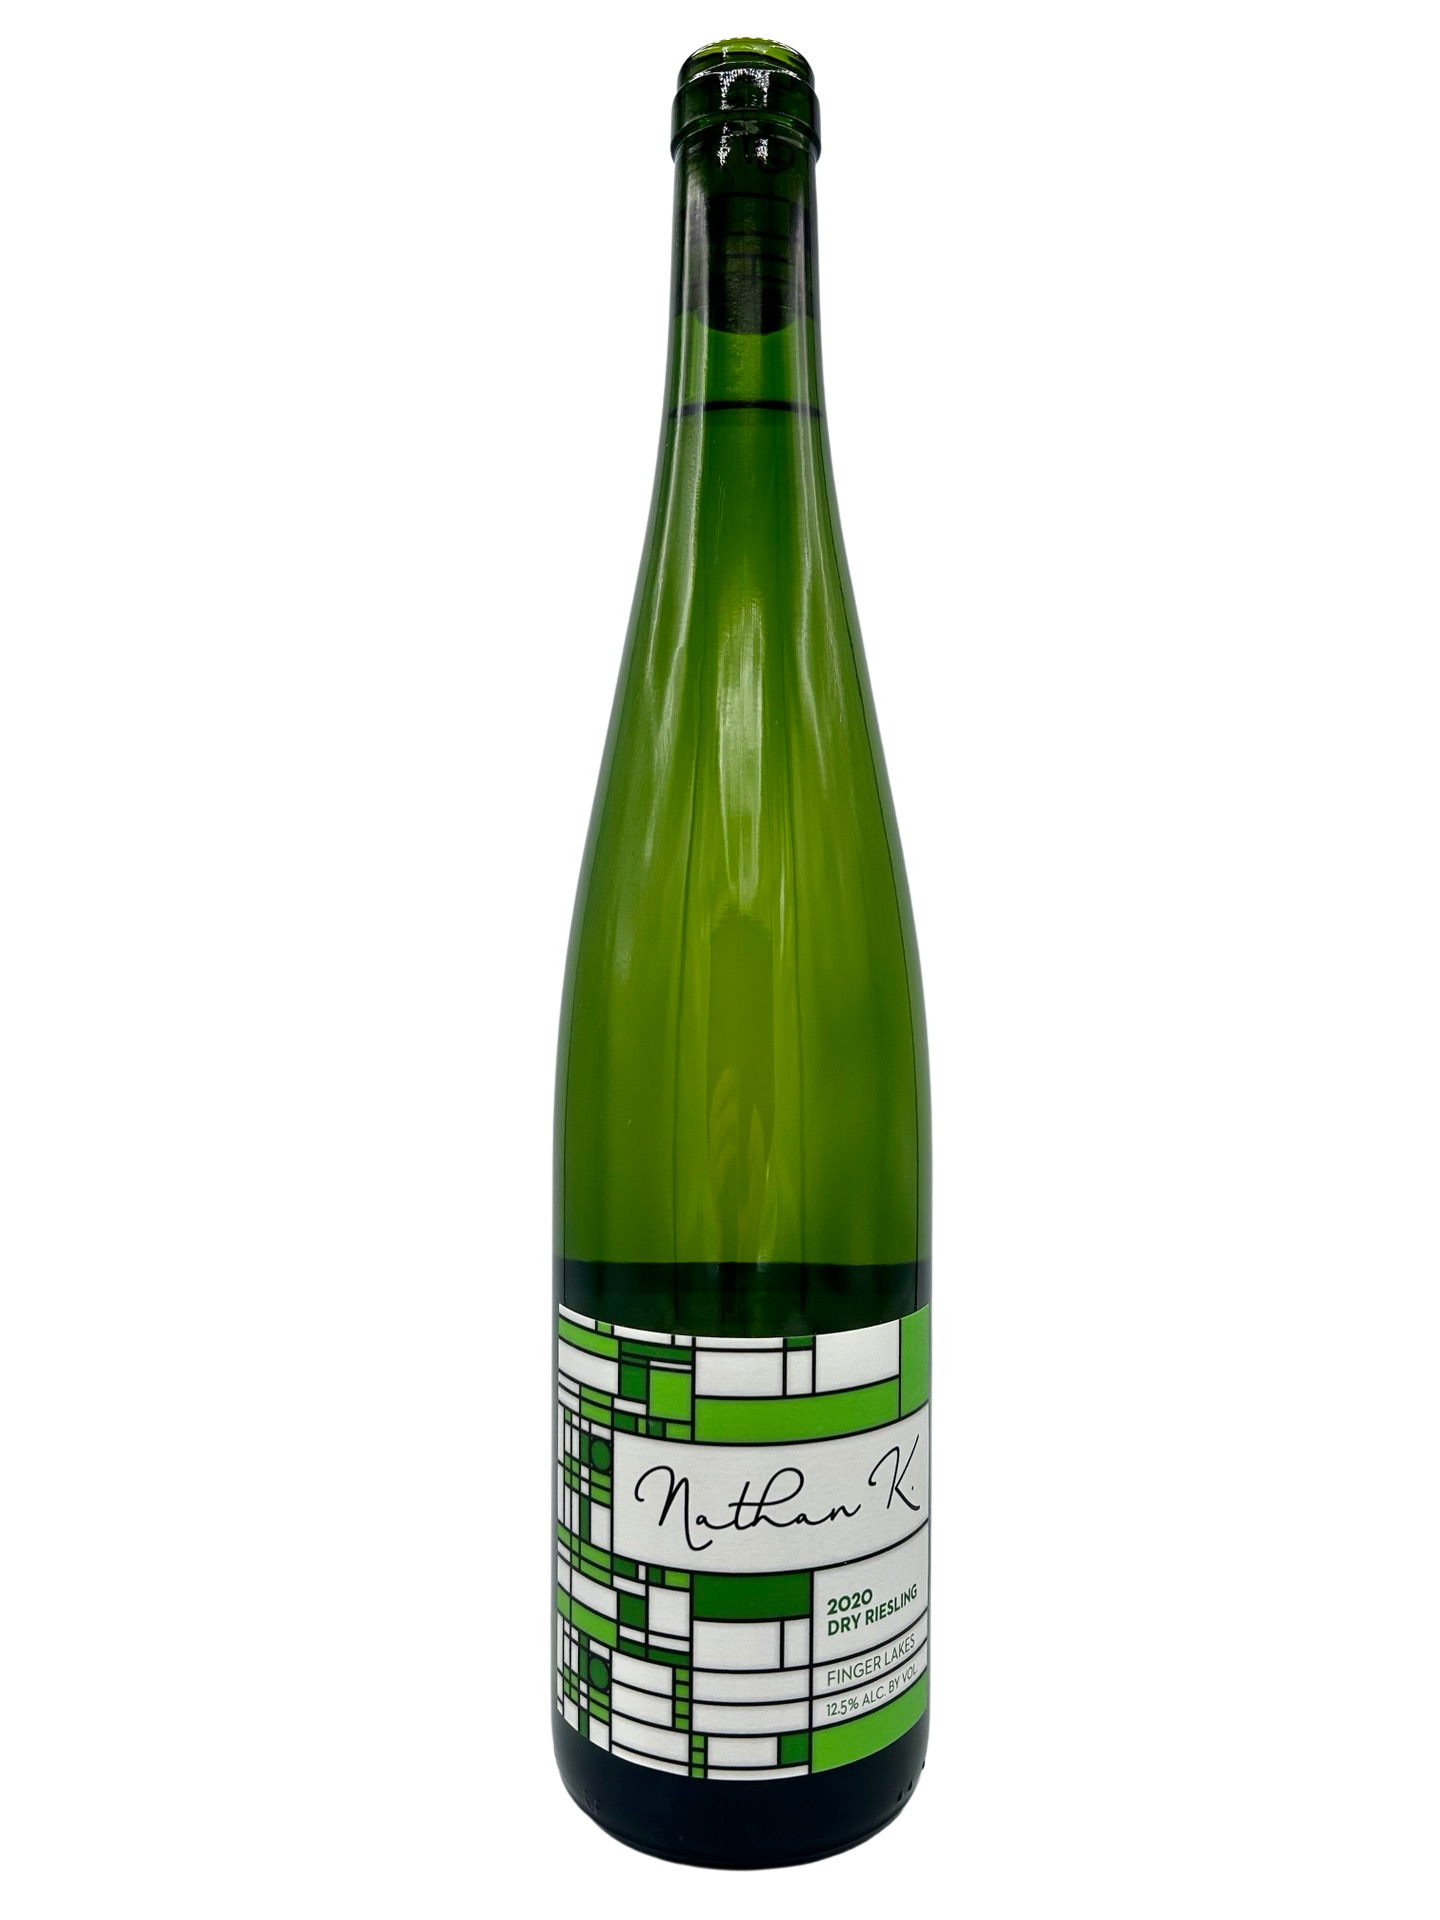 Nathan Dry Riesling 2021